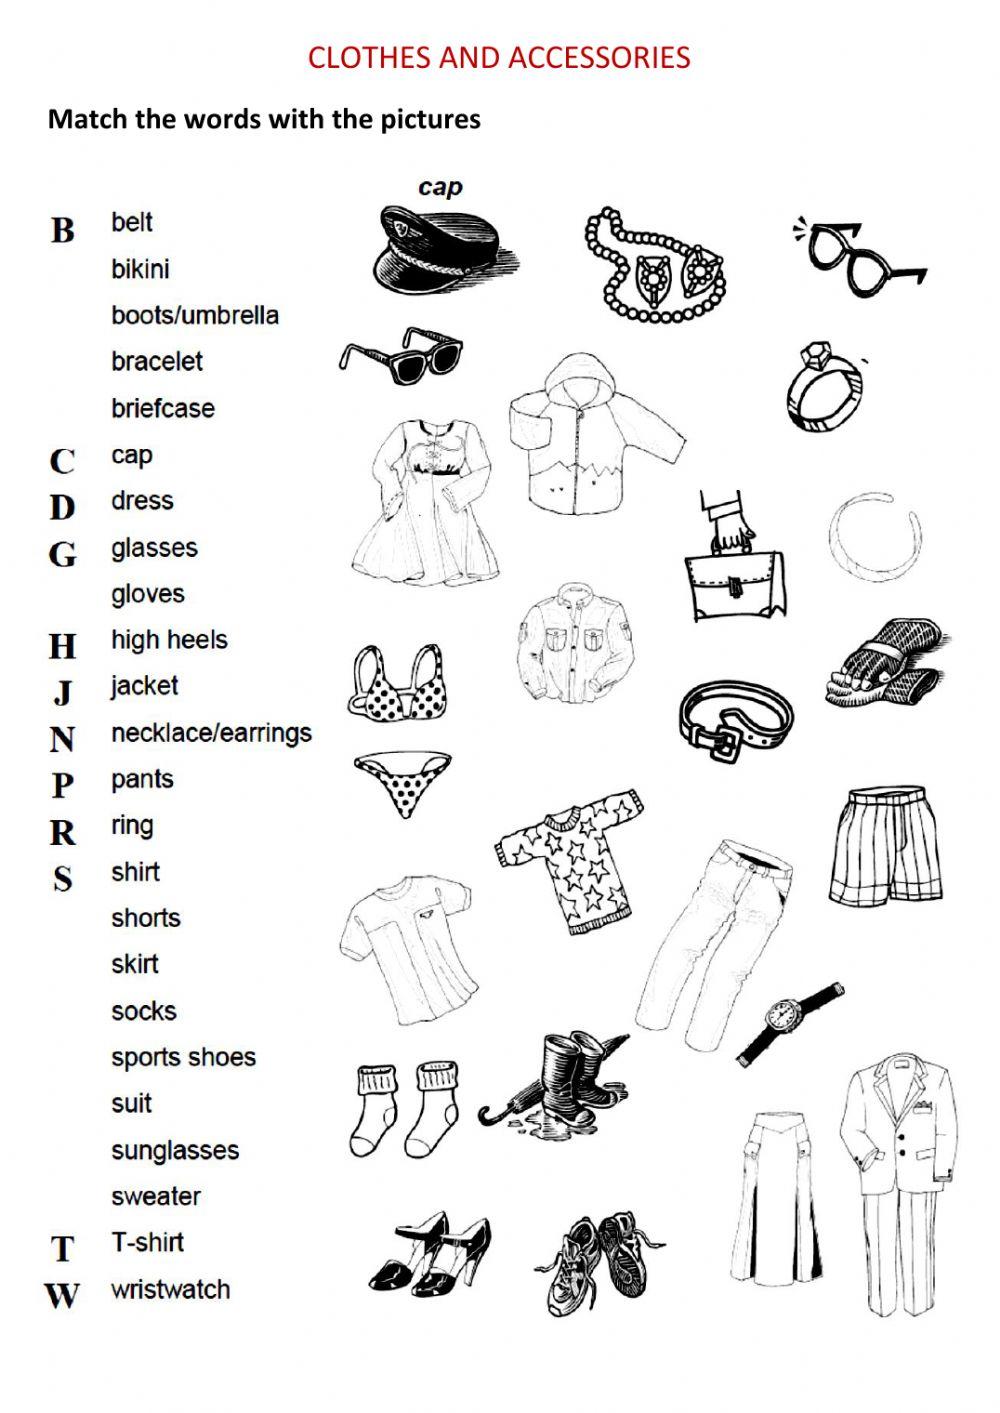 Clothes and accessories interactive activity | Live Worksheets